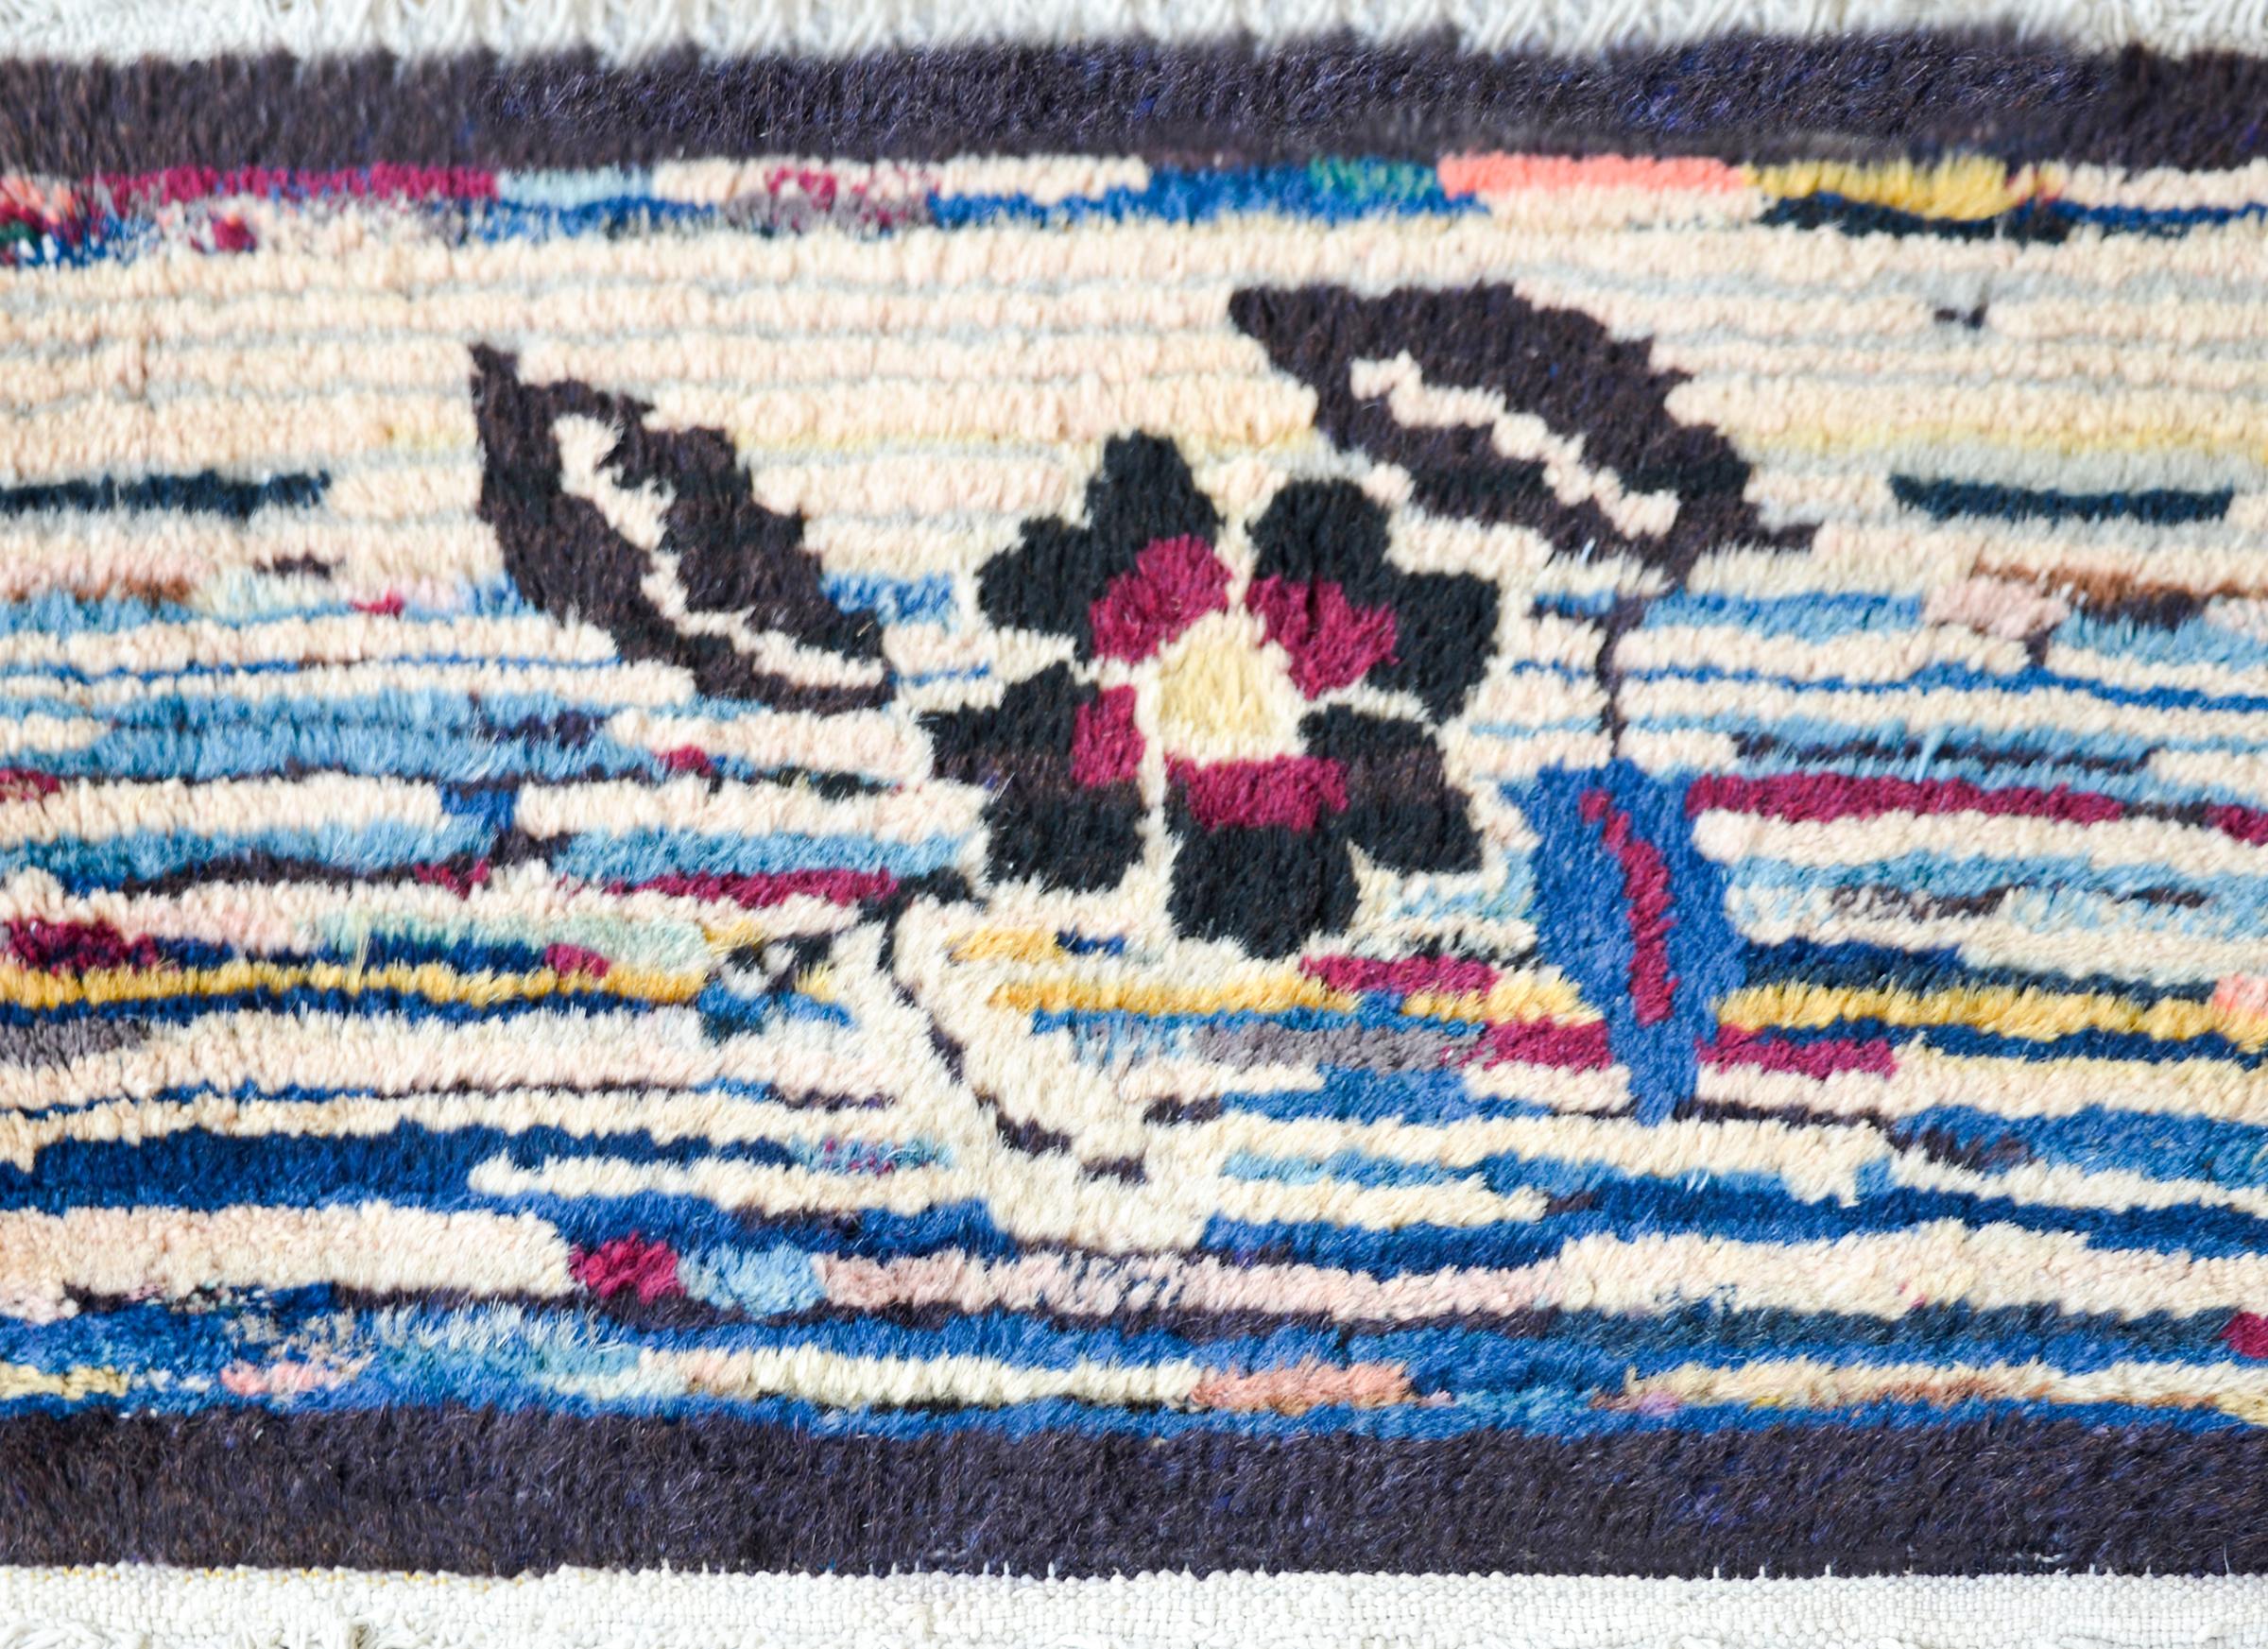 A rare early 20th century Tibetan rug with a single central peony against a multi-colored striped background and surrounded by a thick black border.